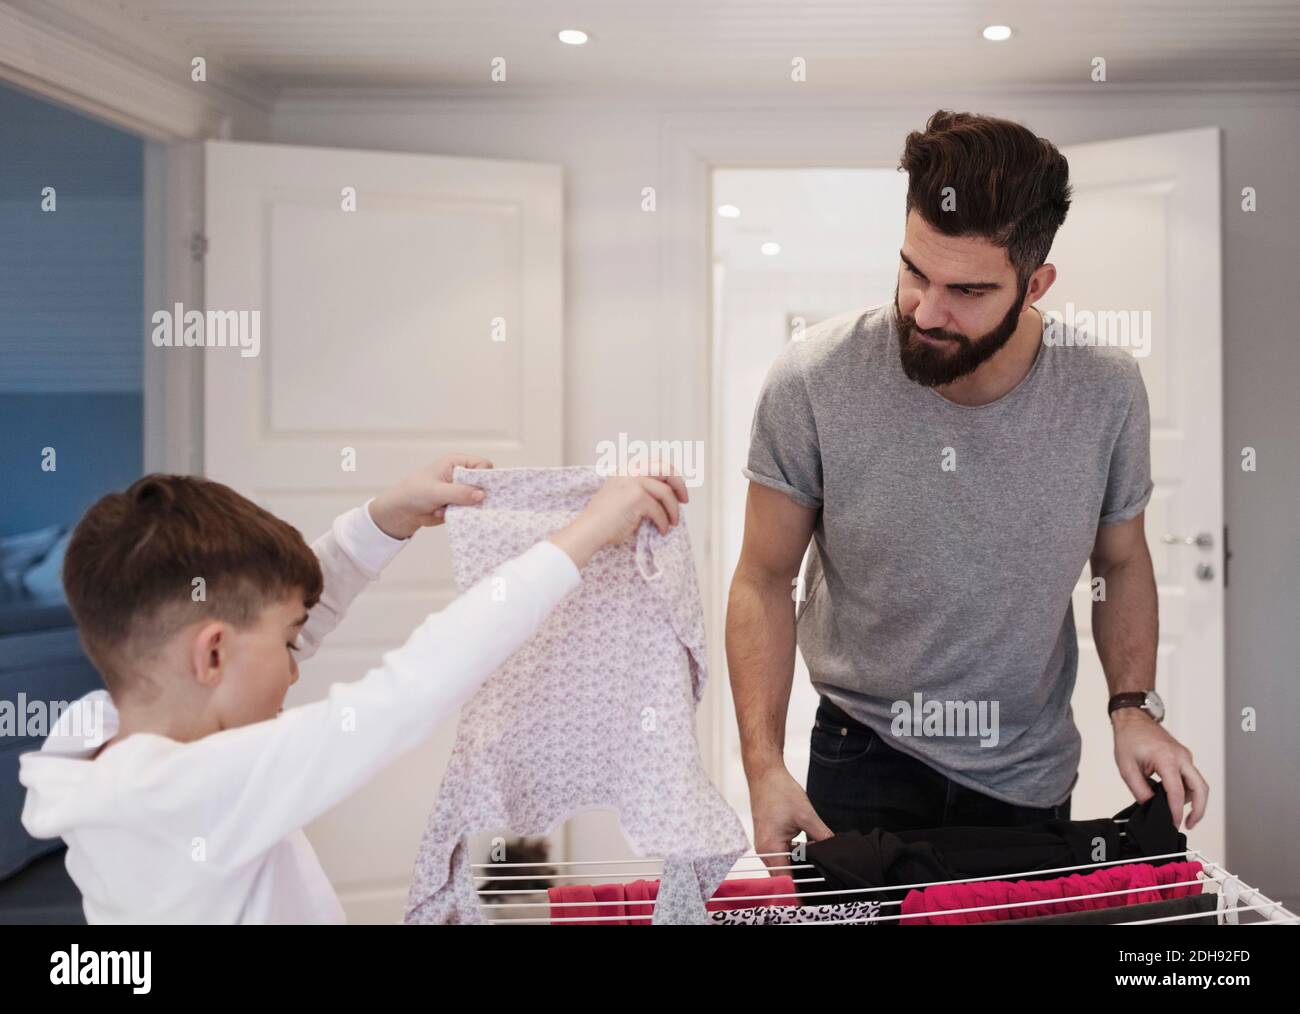 Father looking at boy drying clothes at home Stock Photo